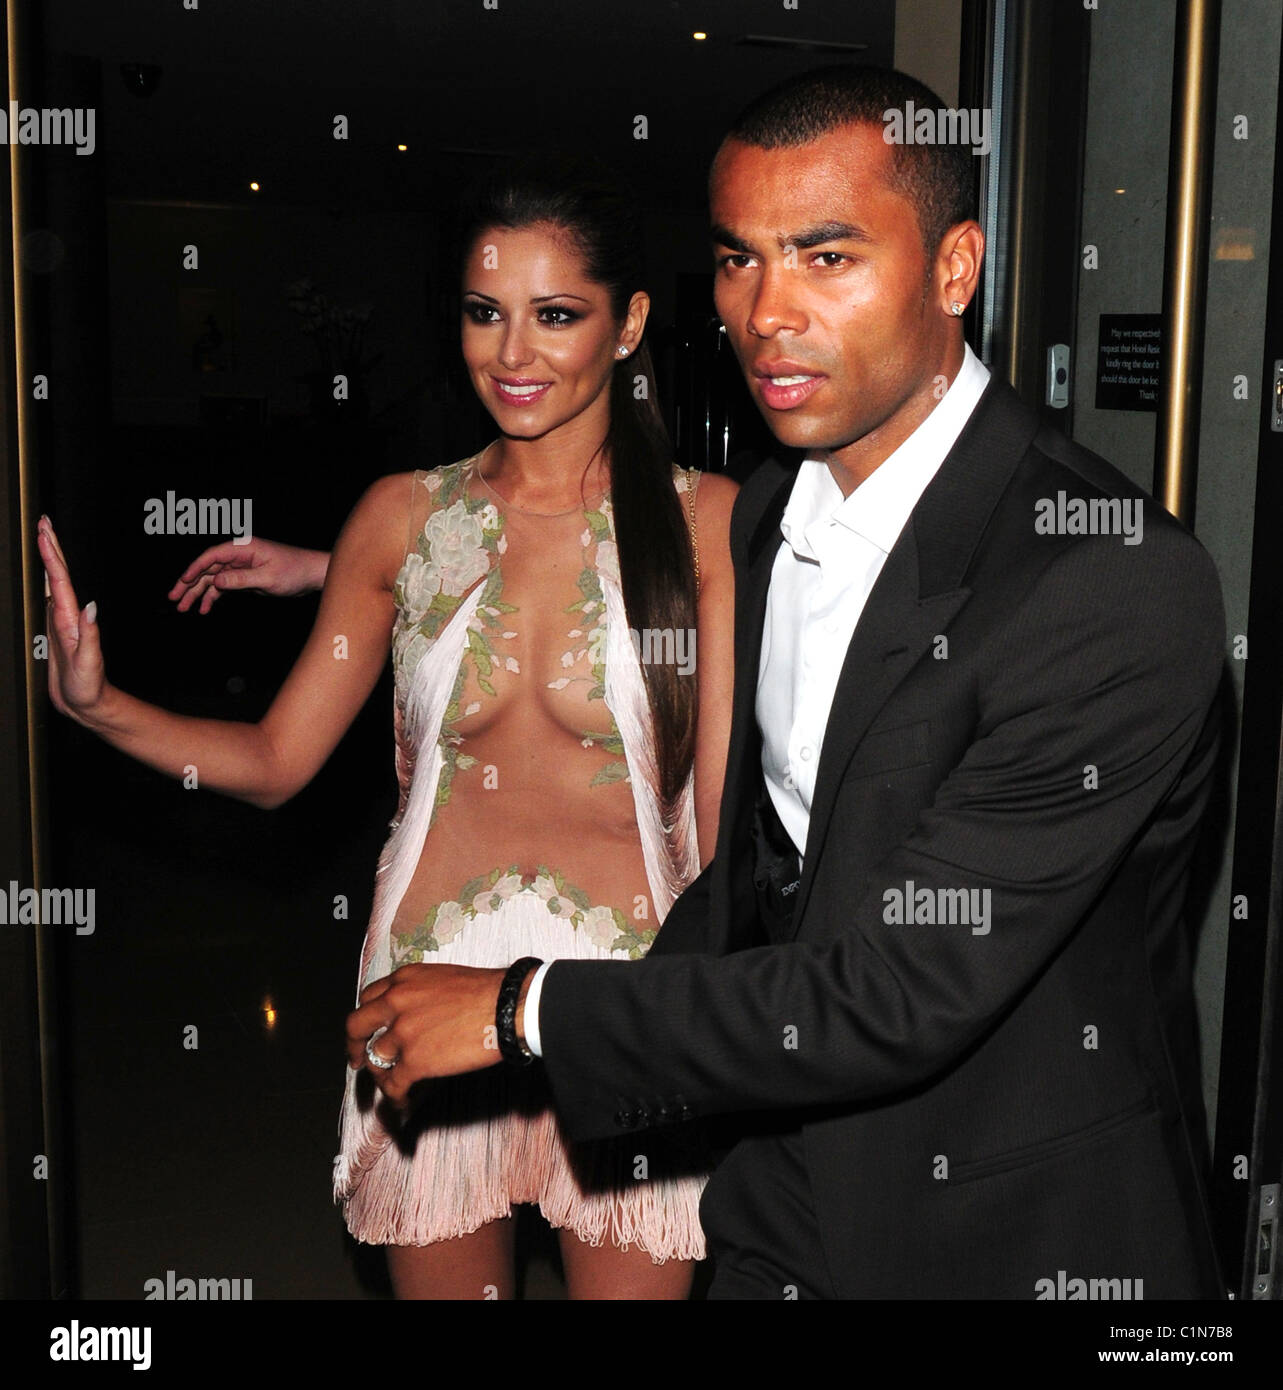 Cheryl Cole and Ashley Cole leaving their hotel heading for Vanilla to celebrate Cheryl's 26th birthday London, England - Stock Photo